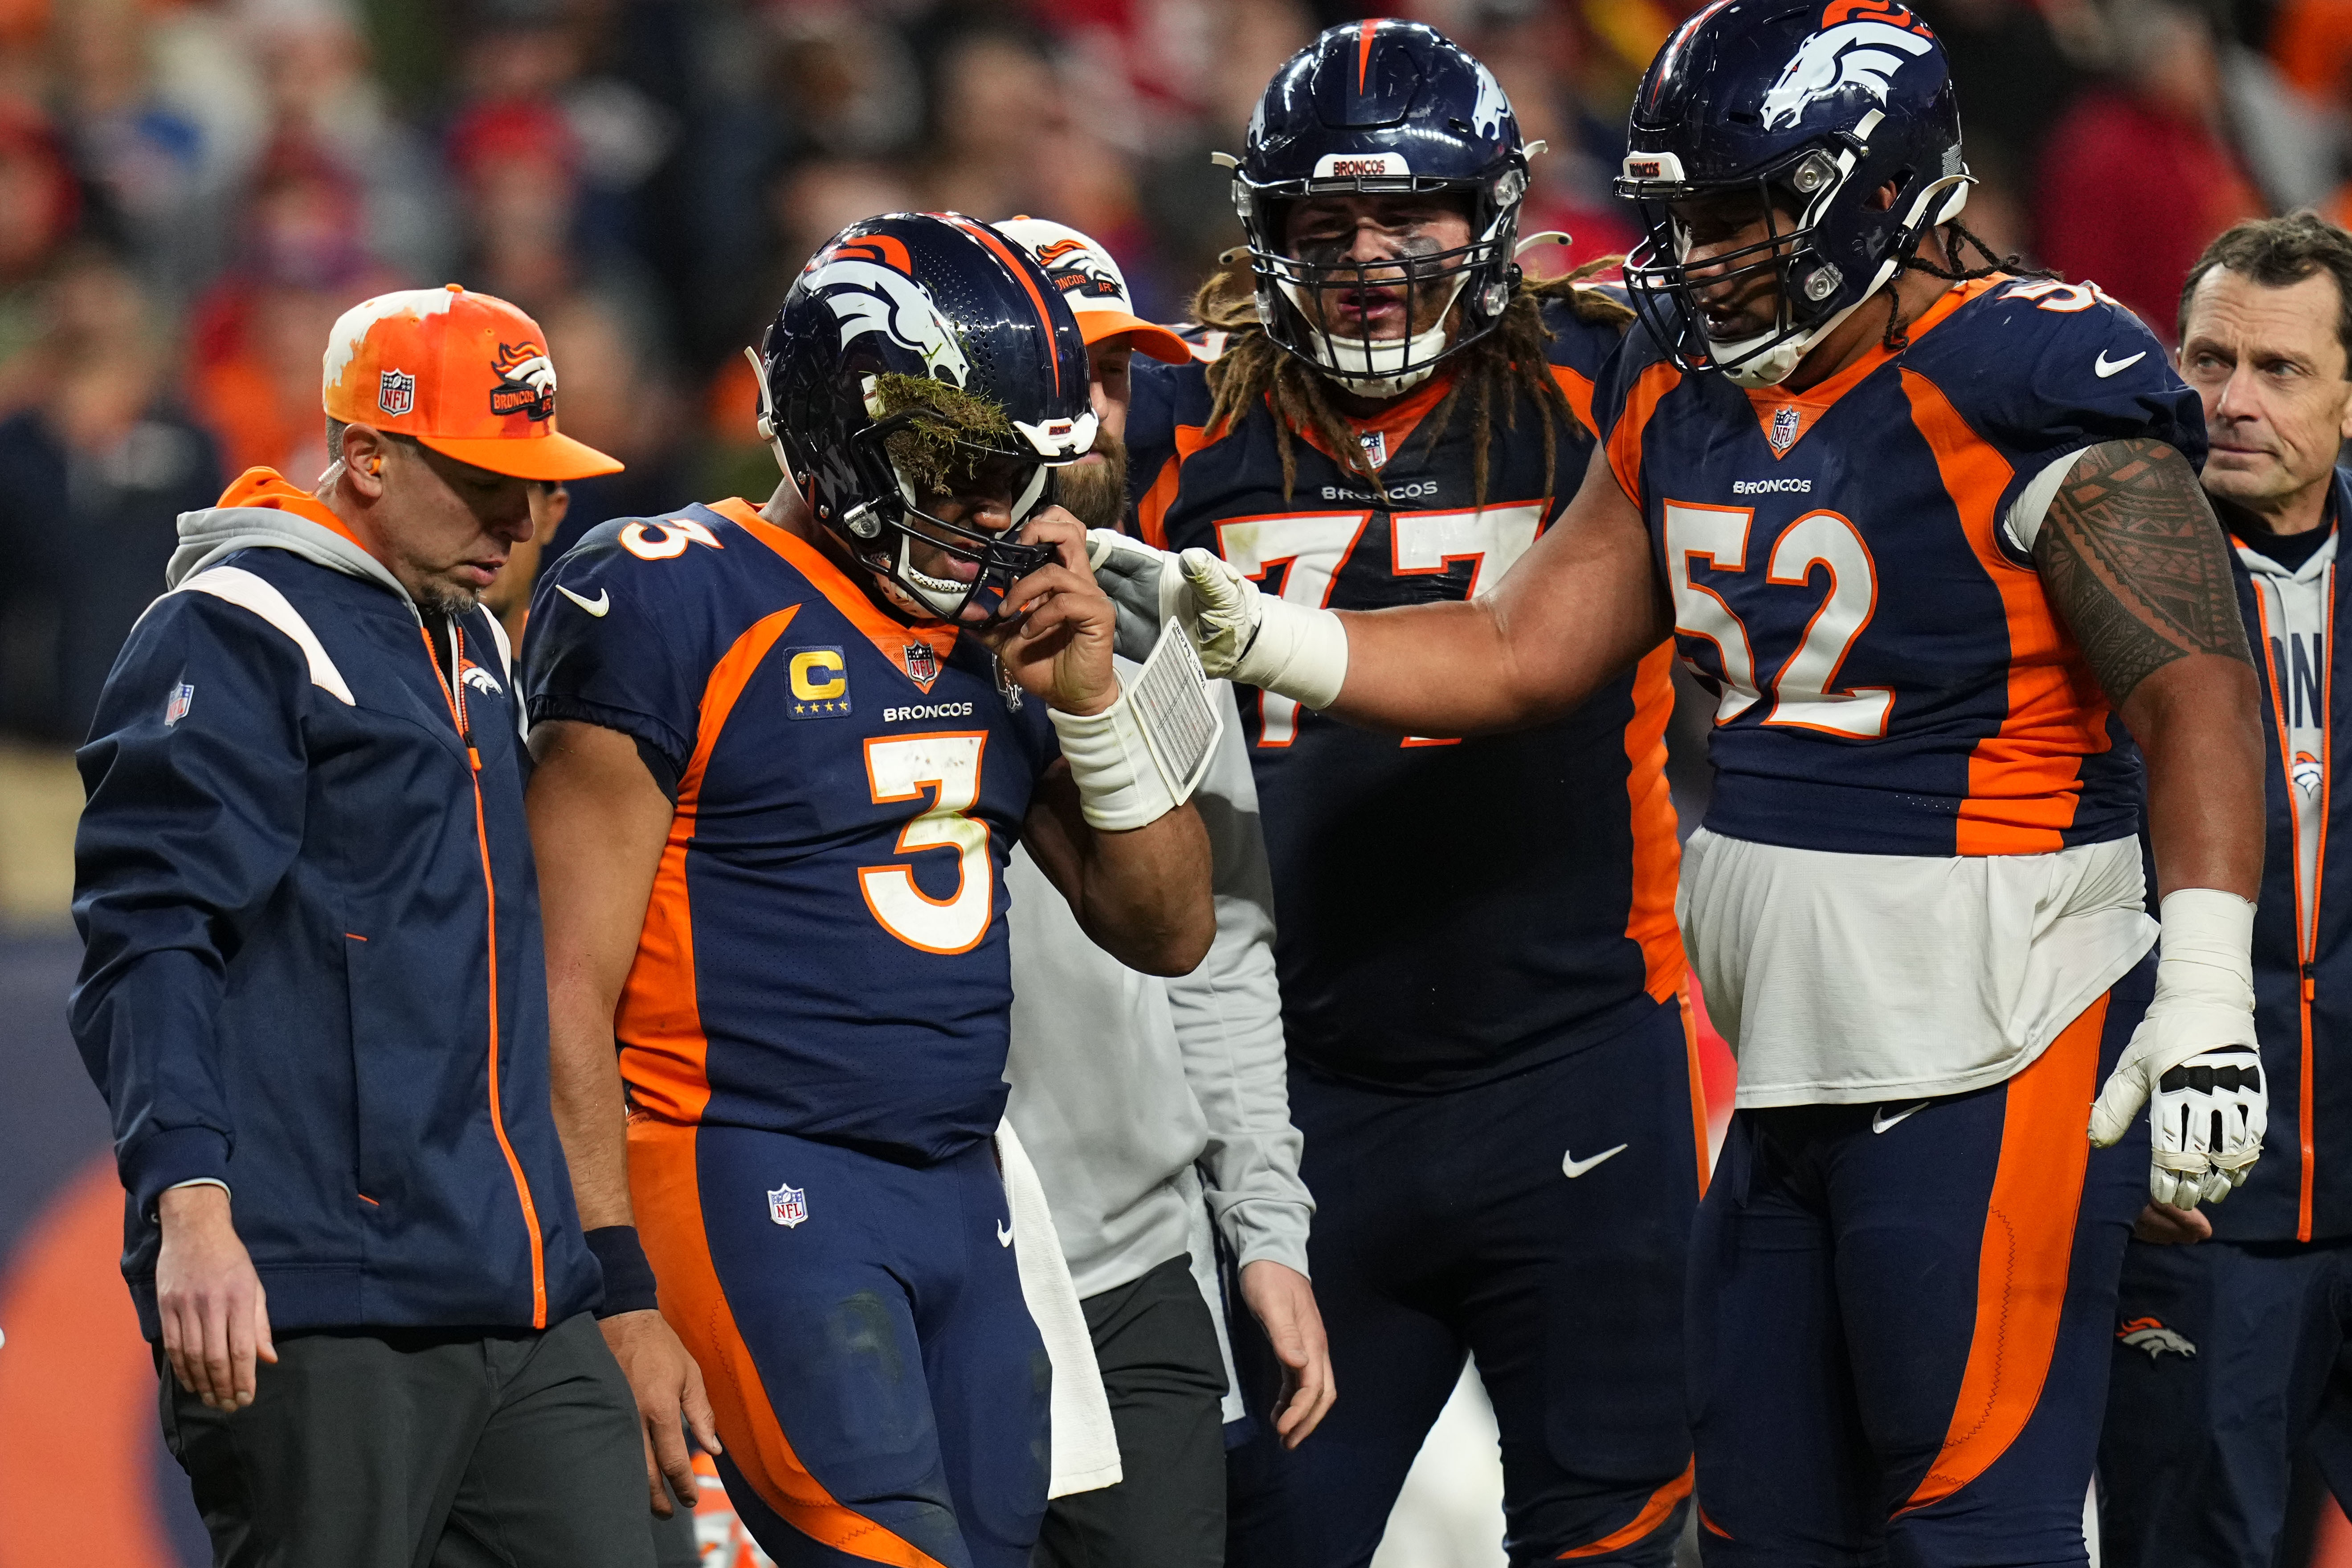 Wilson's concussion latest setback in Broncos' awful year